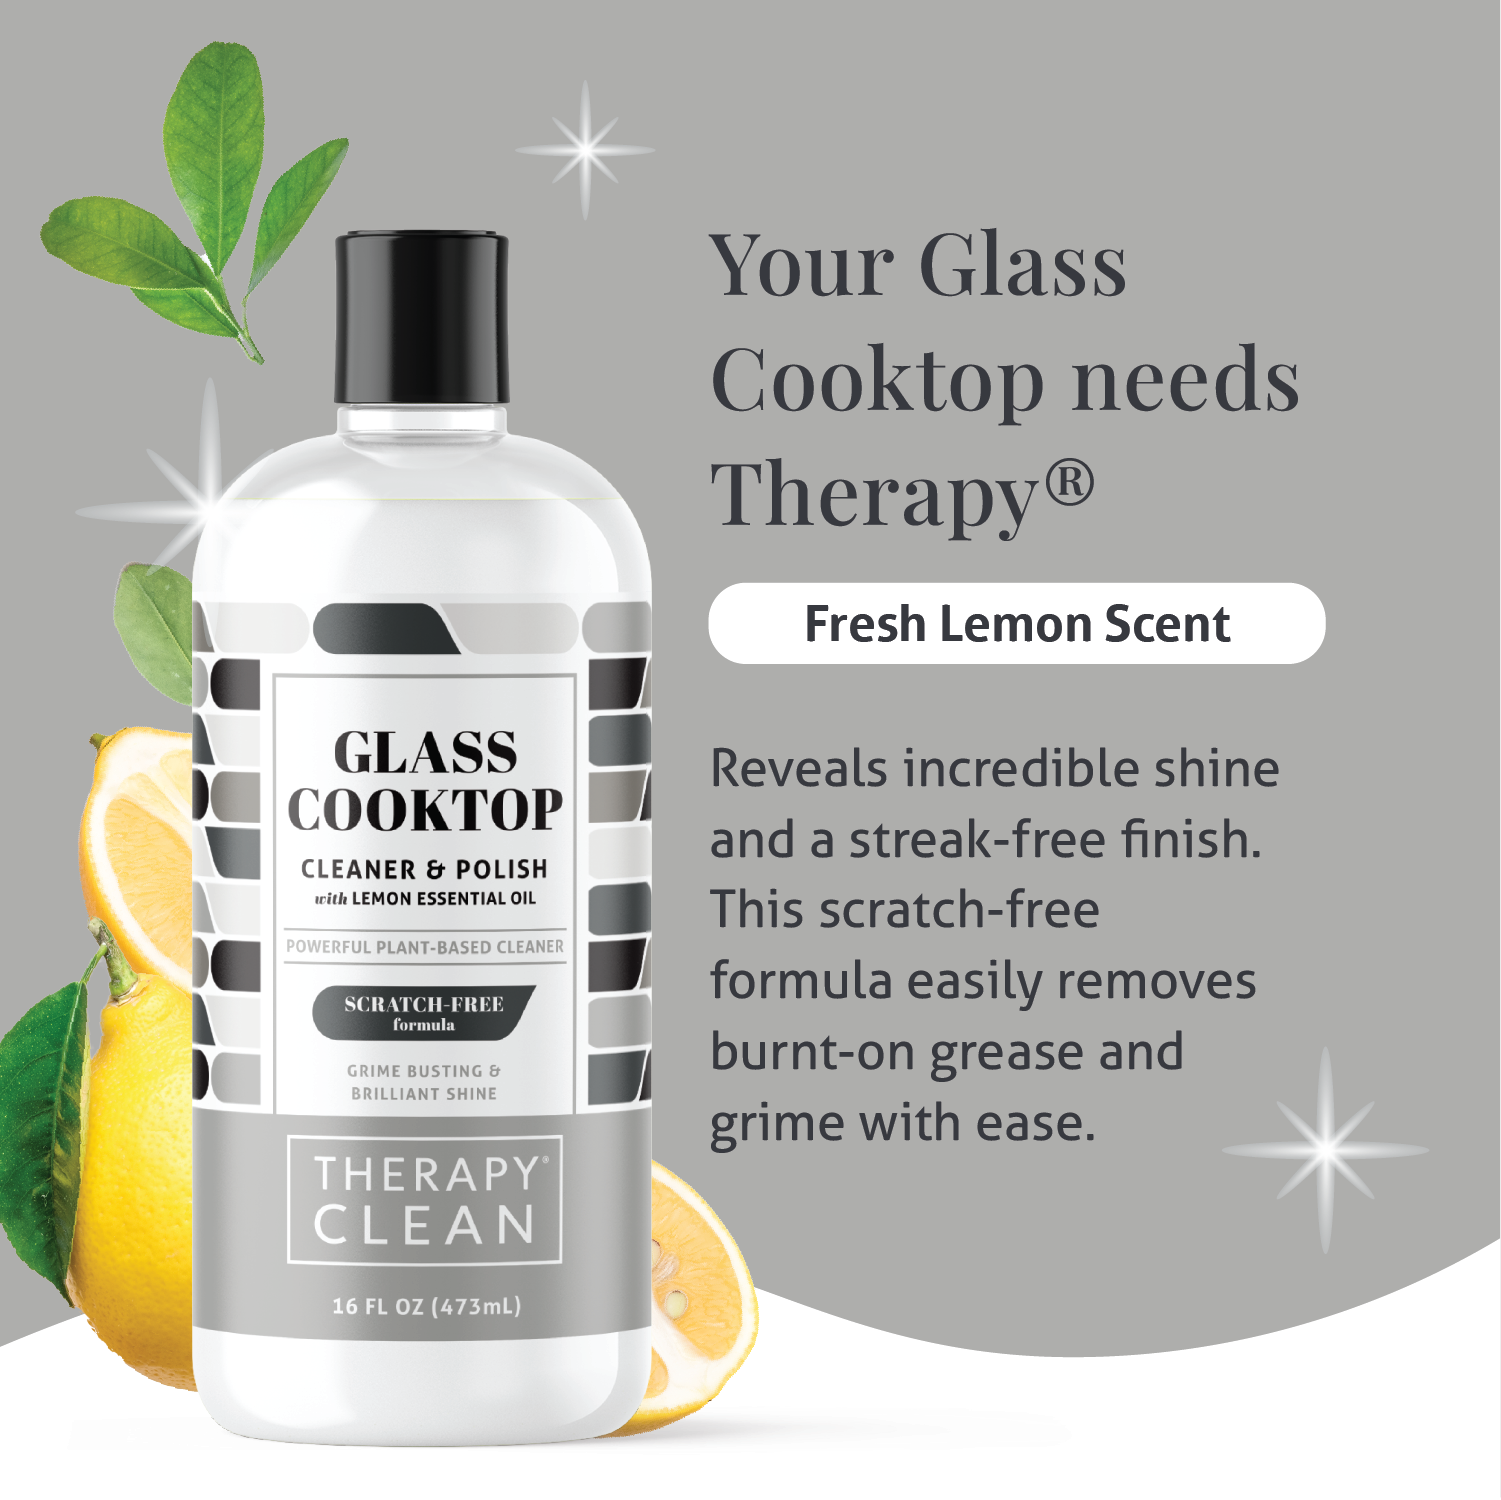 Glass Cooktop Cleaner & Polish 16 oz.